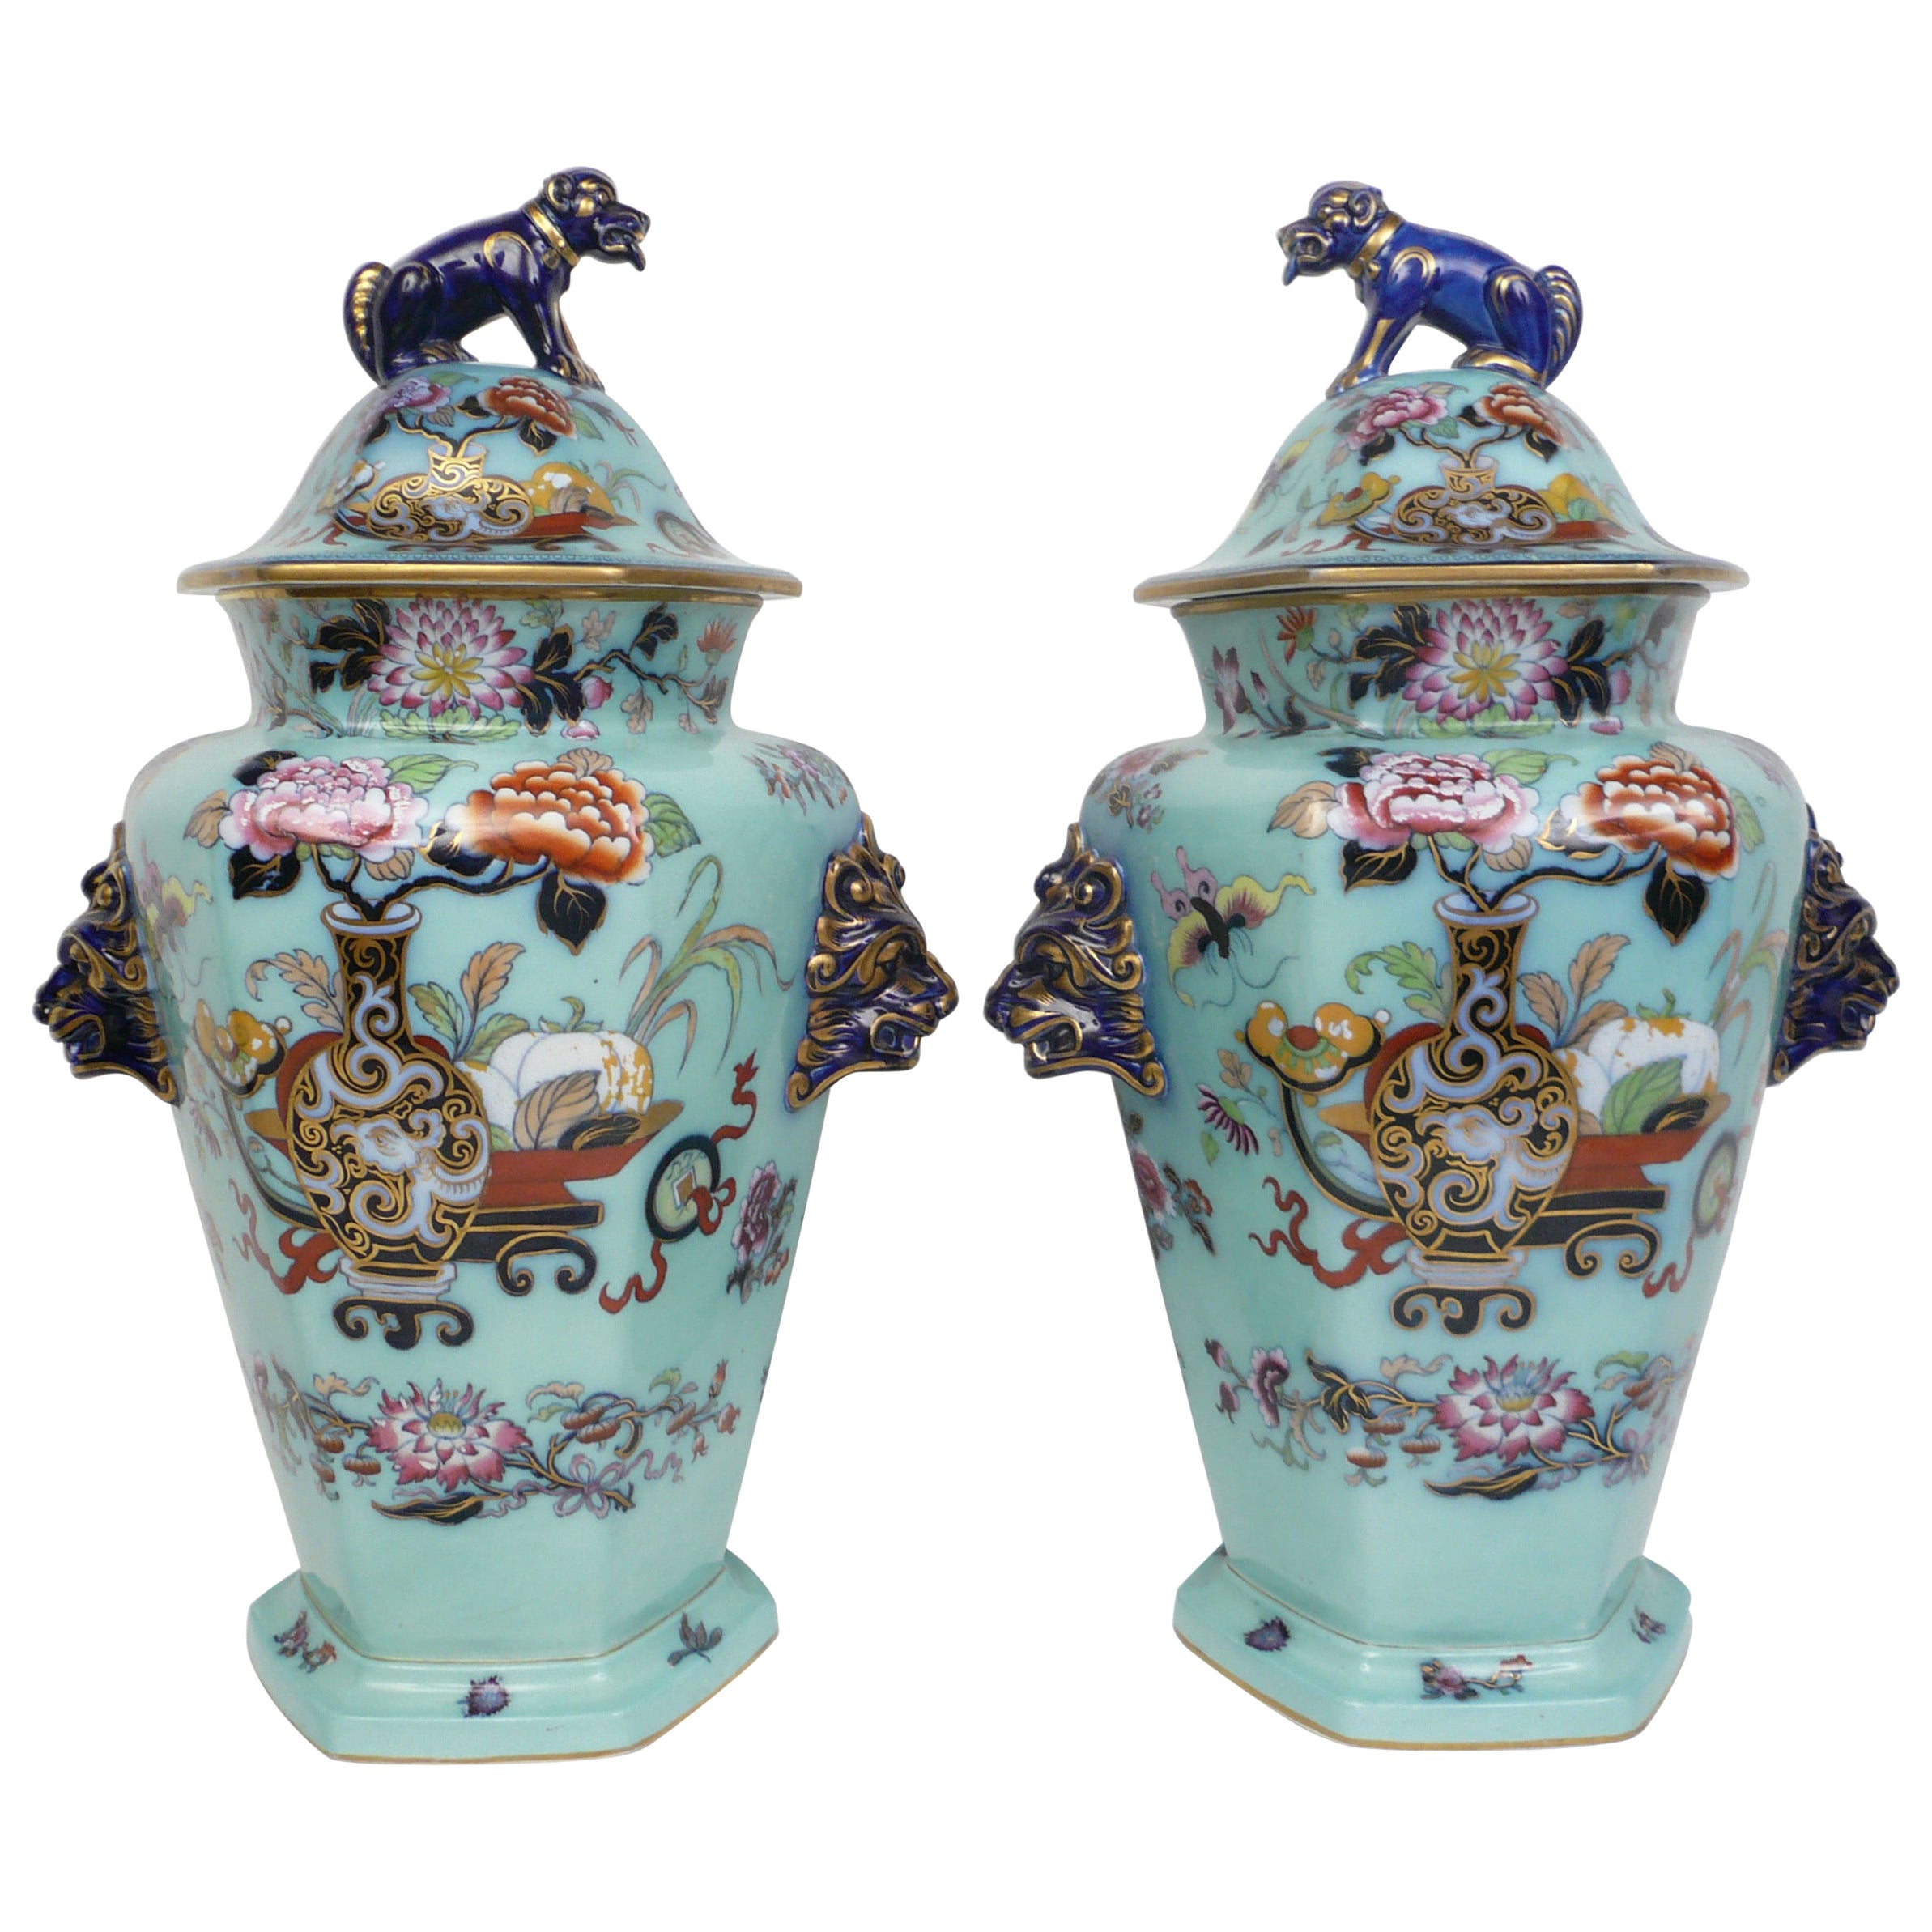 Large Pair of English Ironstone Lidded Vases with Foo Dog Finials